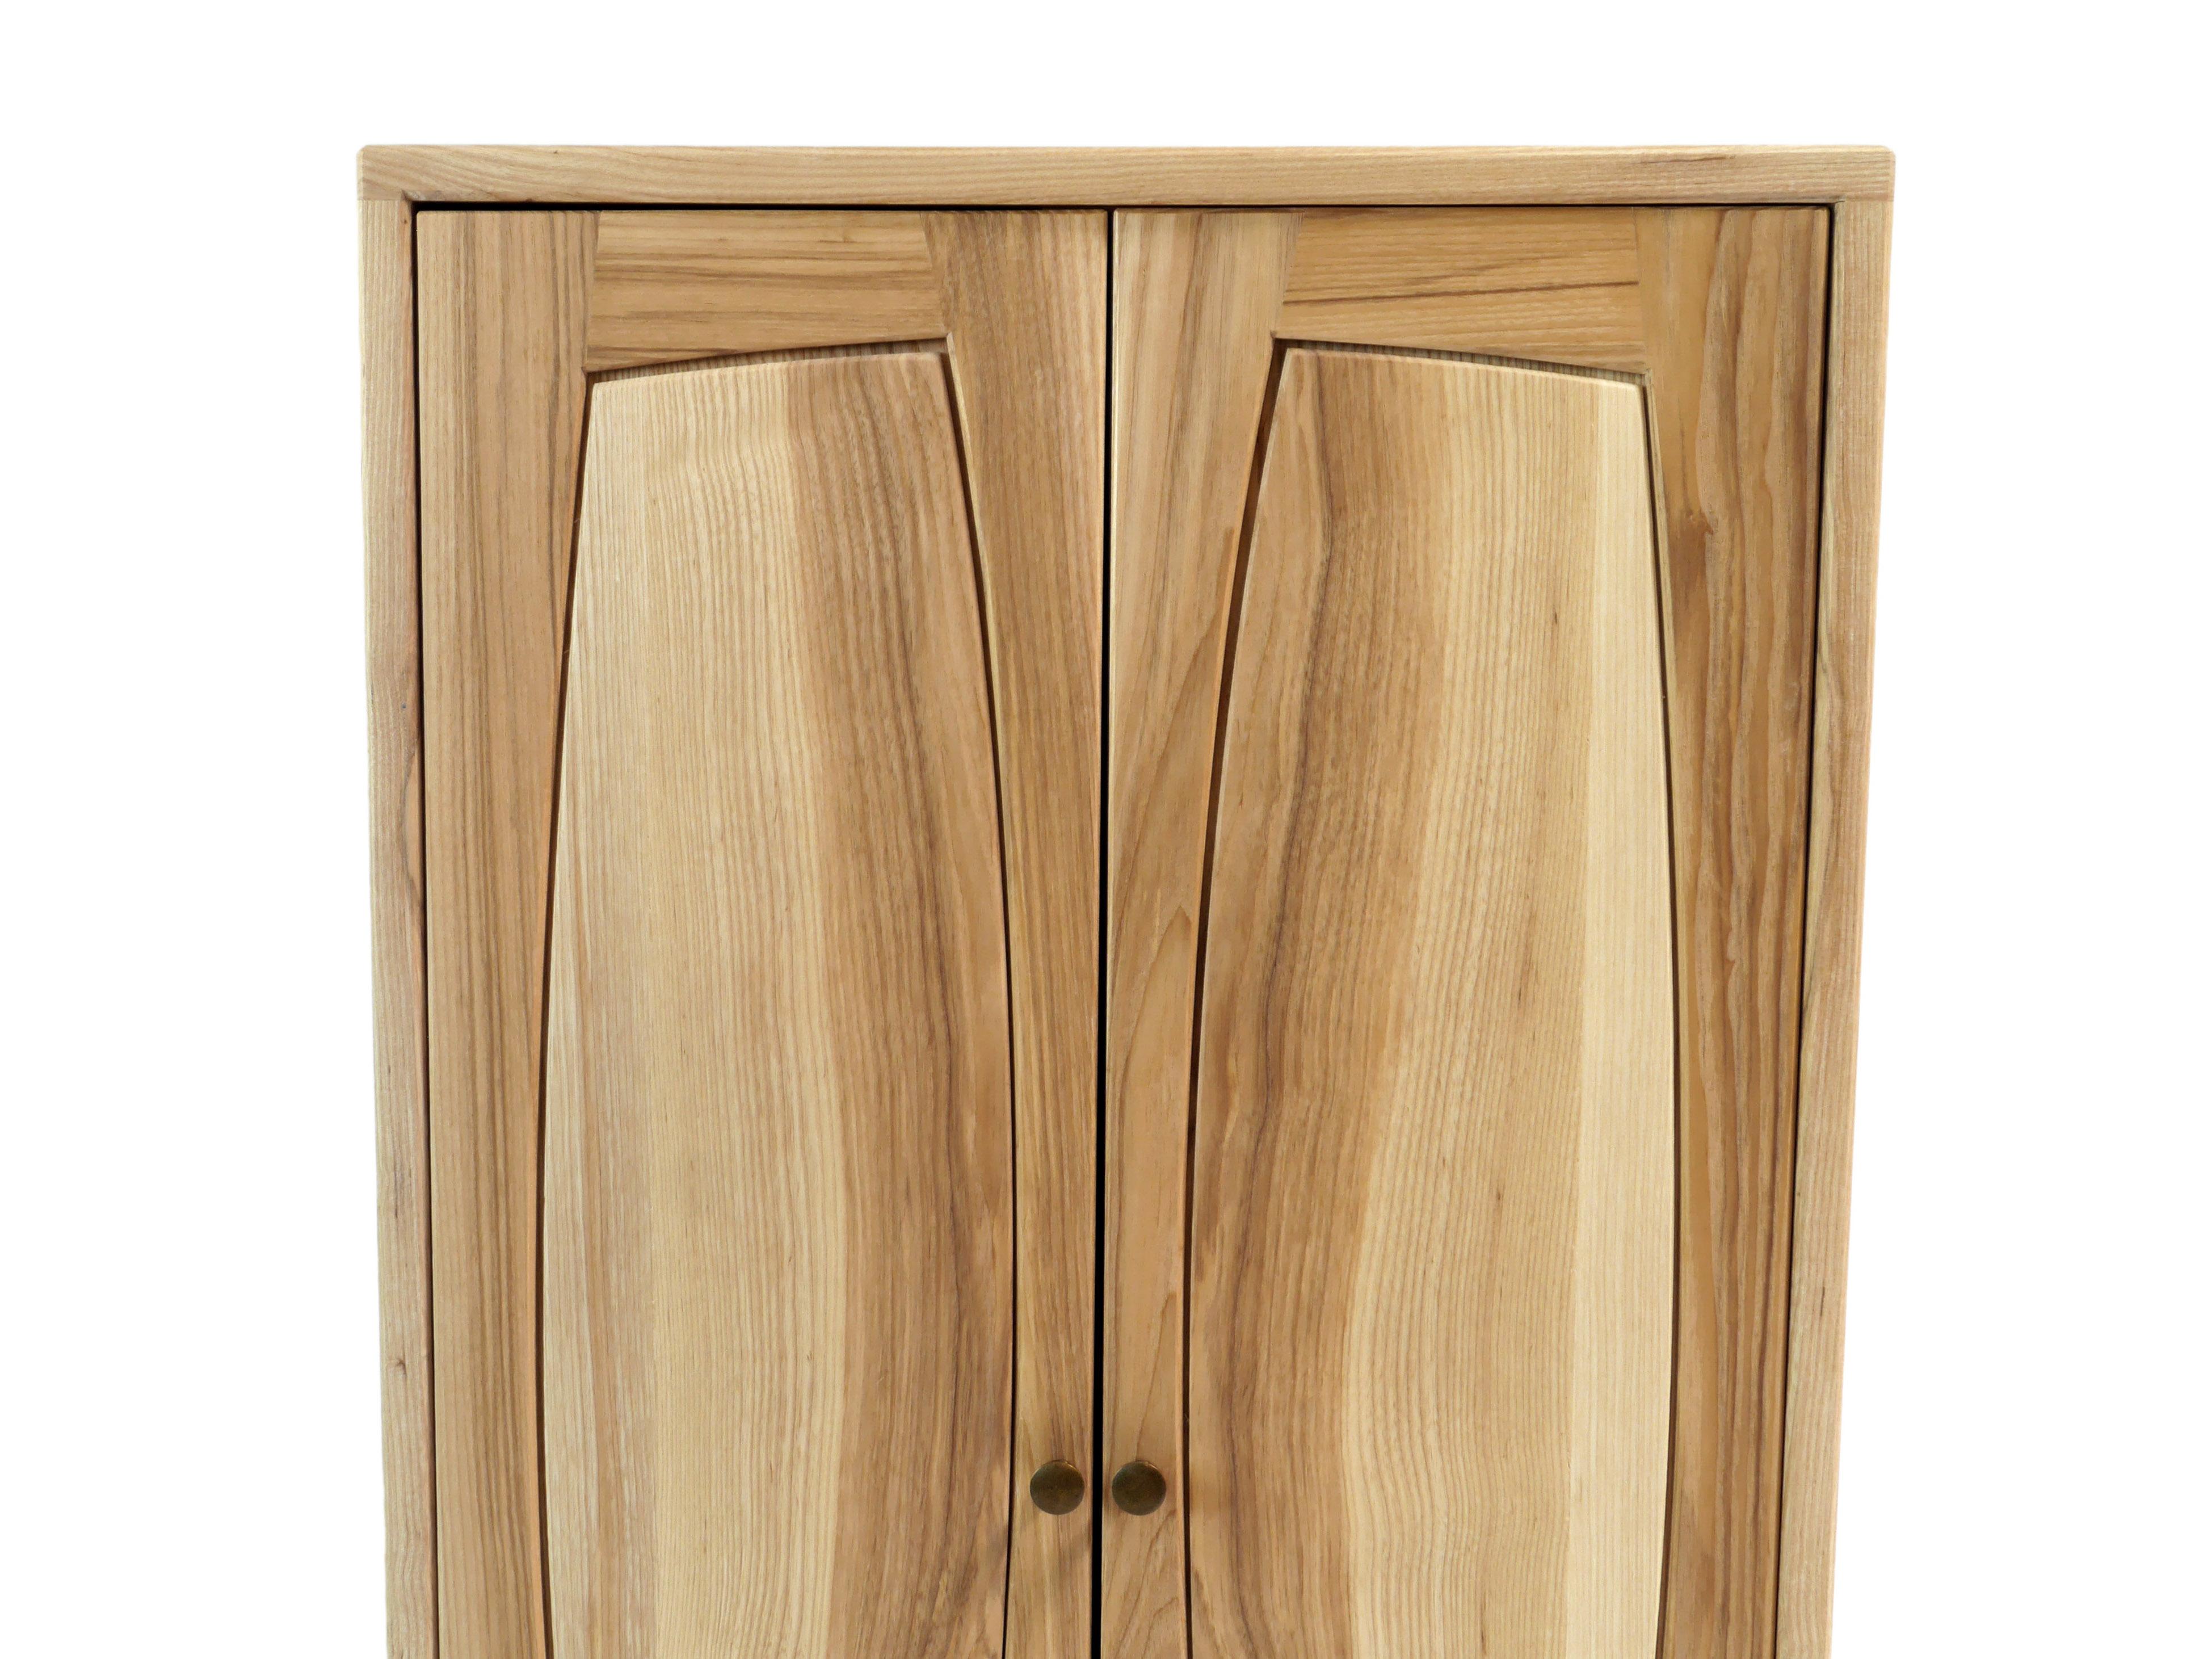 The stately Vespers Side Cabinet is built of solid ash hardwood with a black walnut stand. Its two doors are made with curved frame and raised panel construction adding playfulness to a traditional form.  It has a single solid wood adjustable shelf